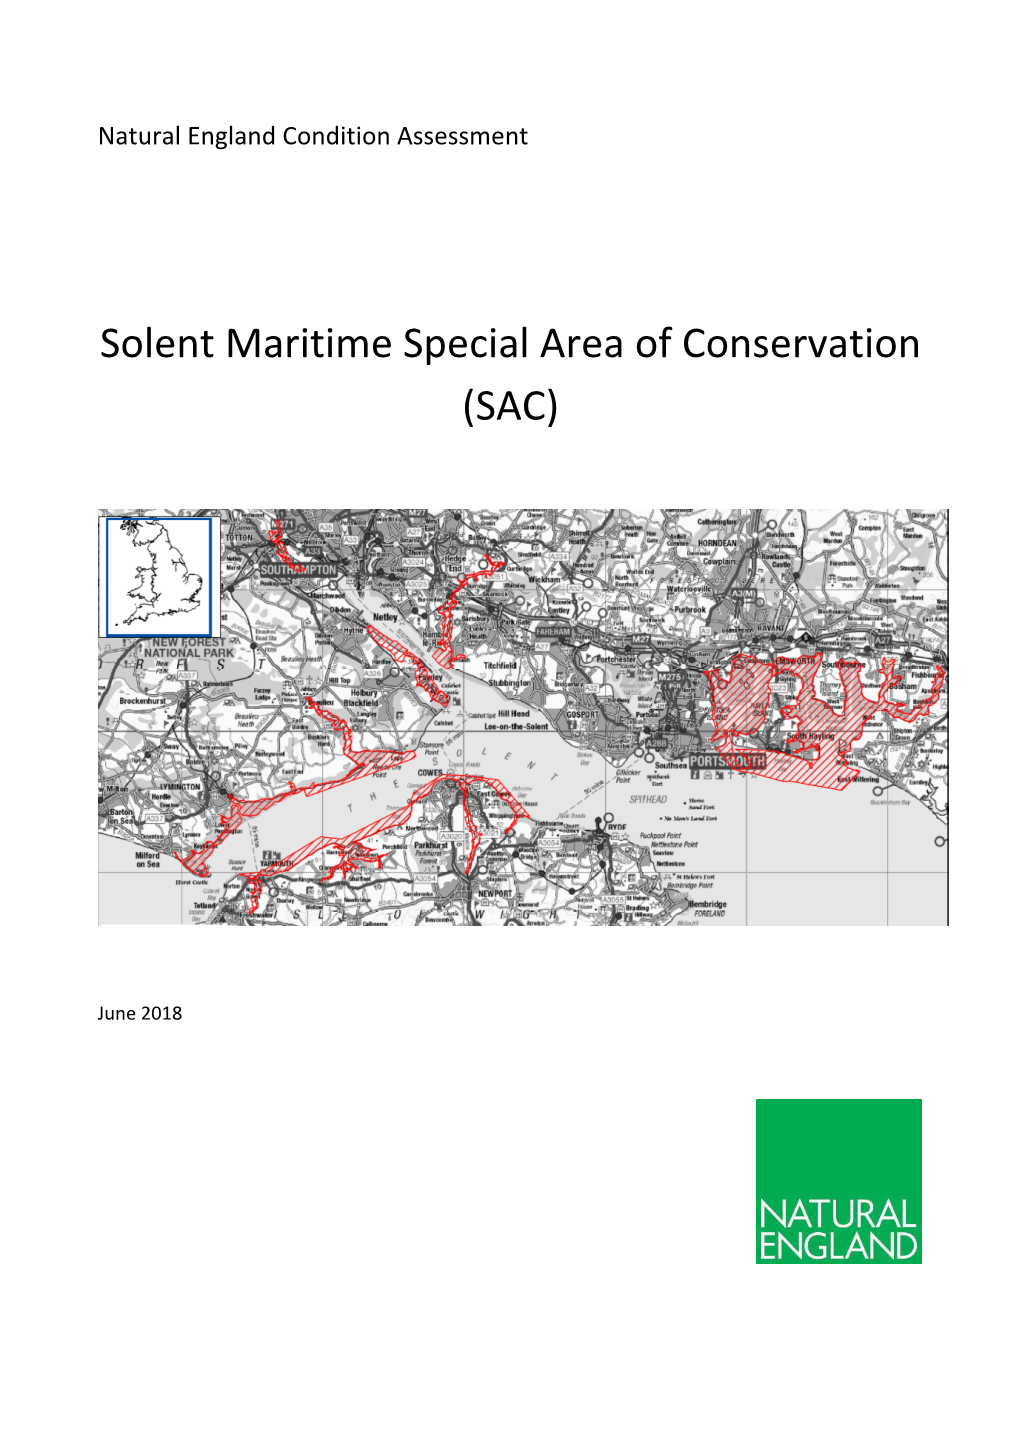 Solent Maritime Special Area of Conservation (SAC)